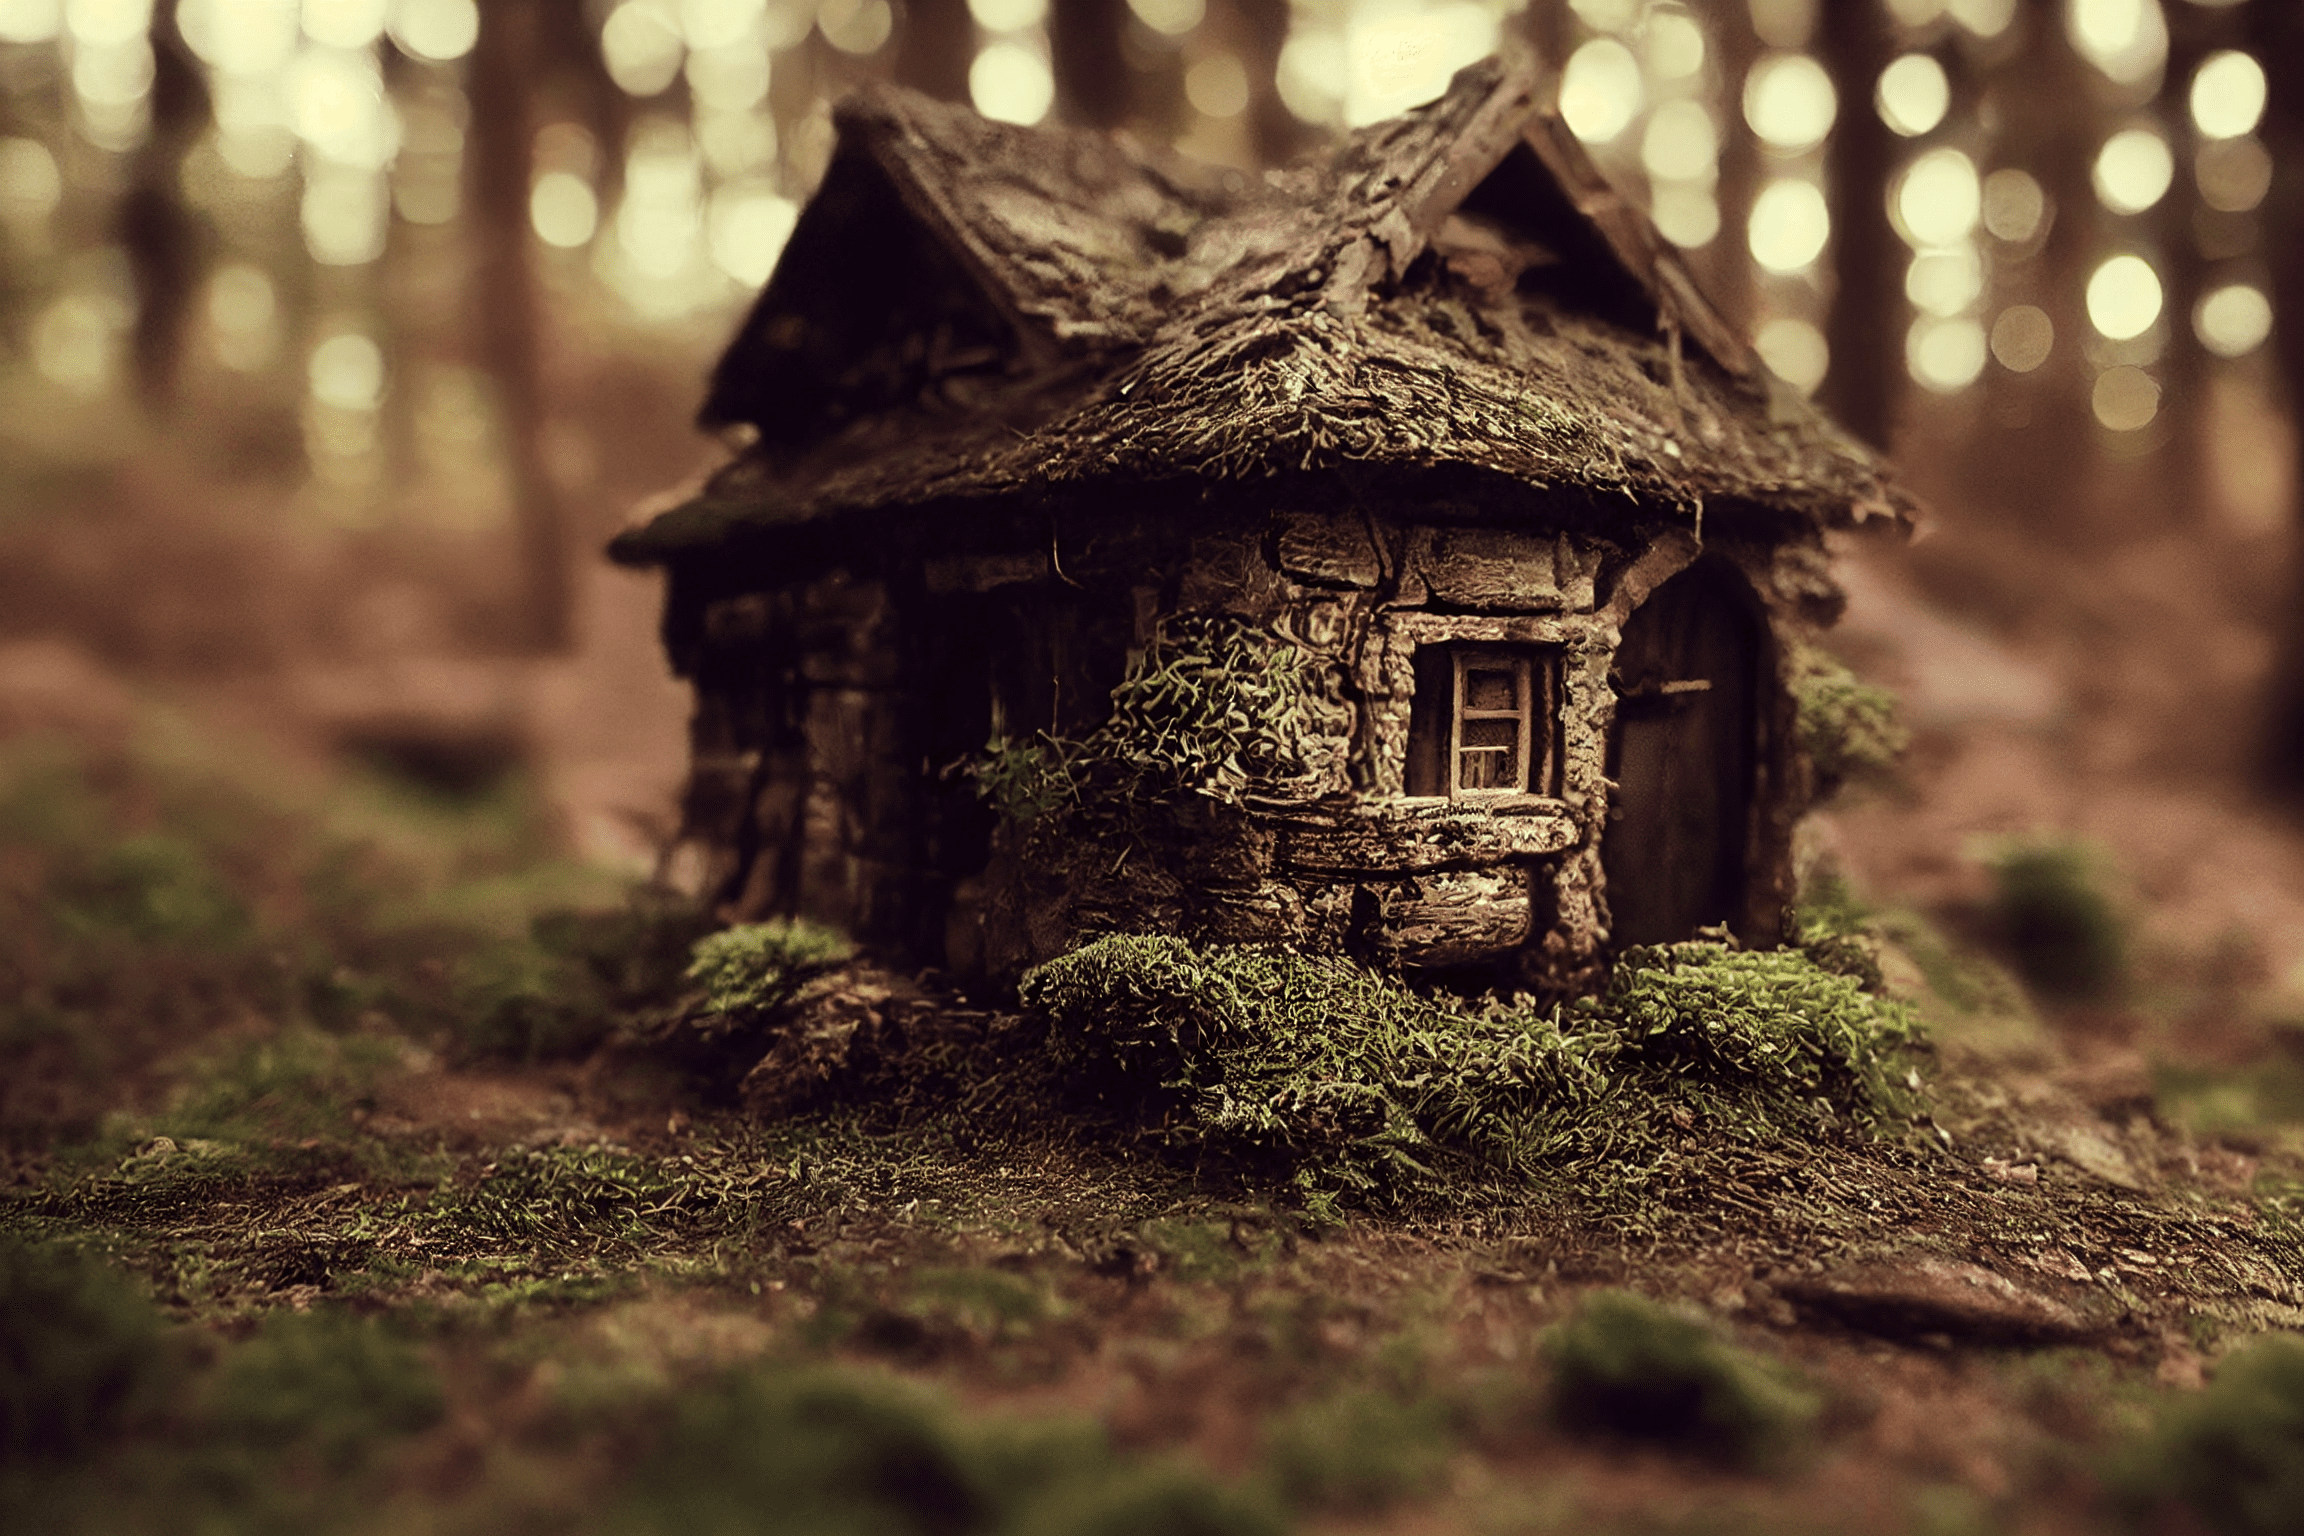 Way back a year ago – Cabincore miniature cabin of a witch